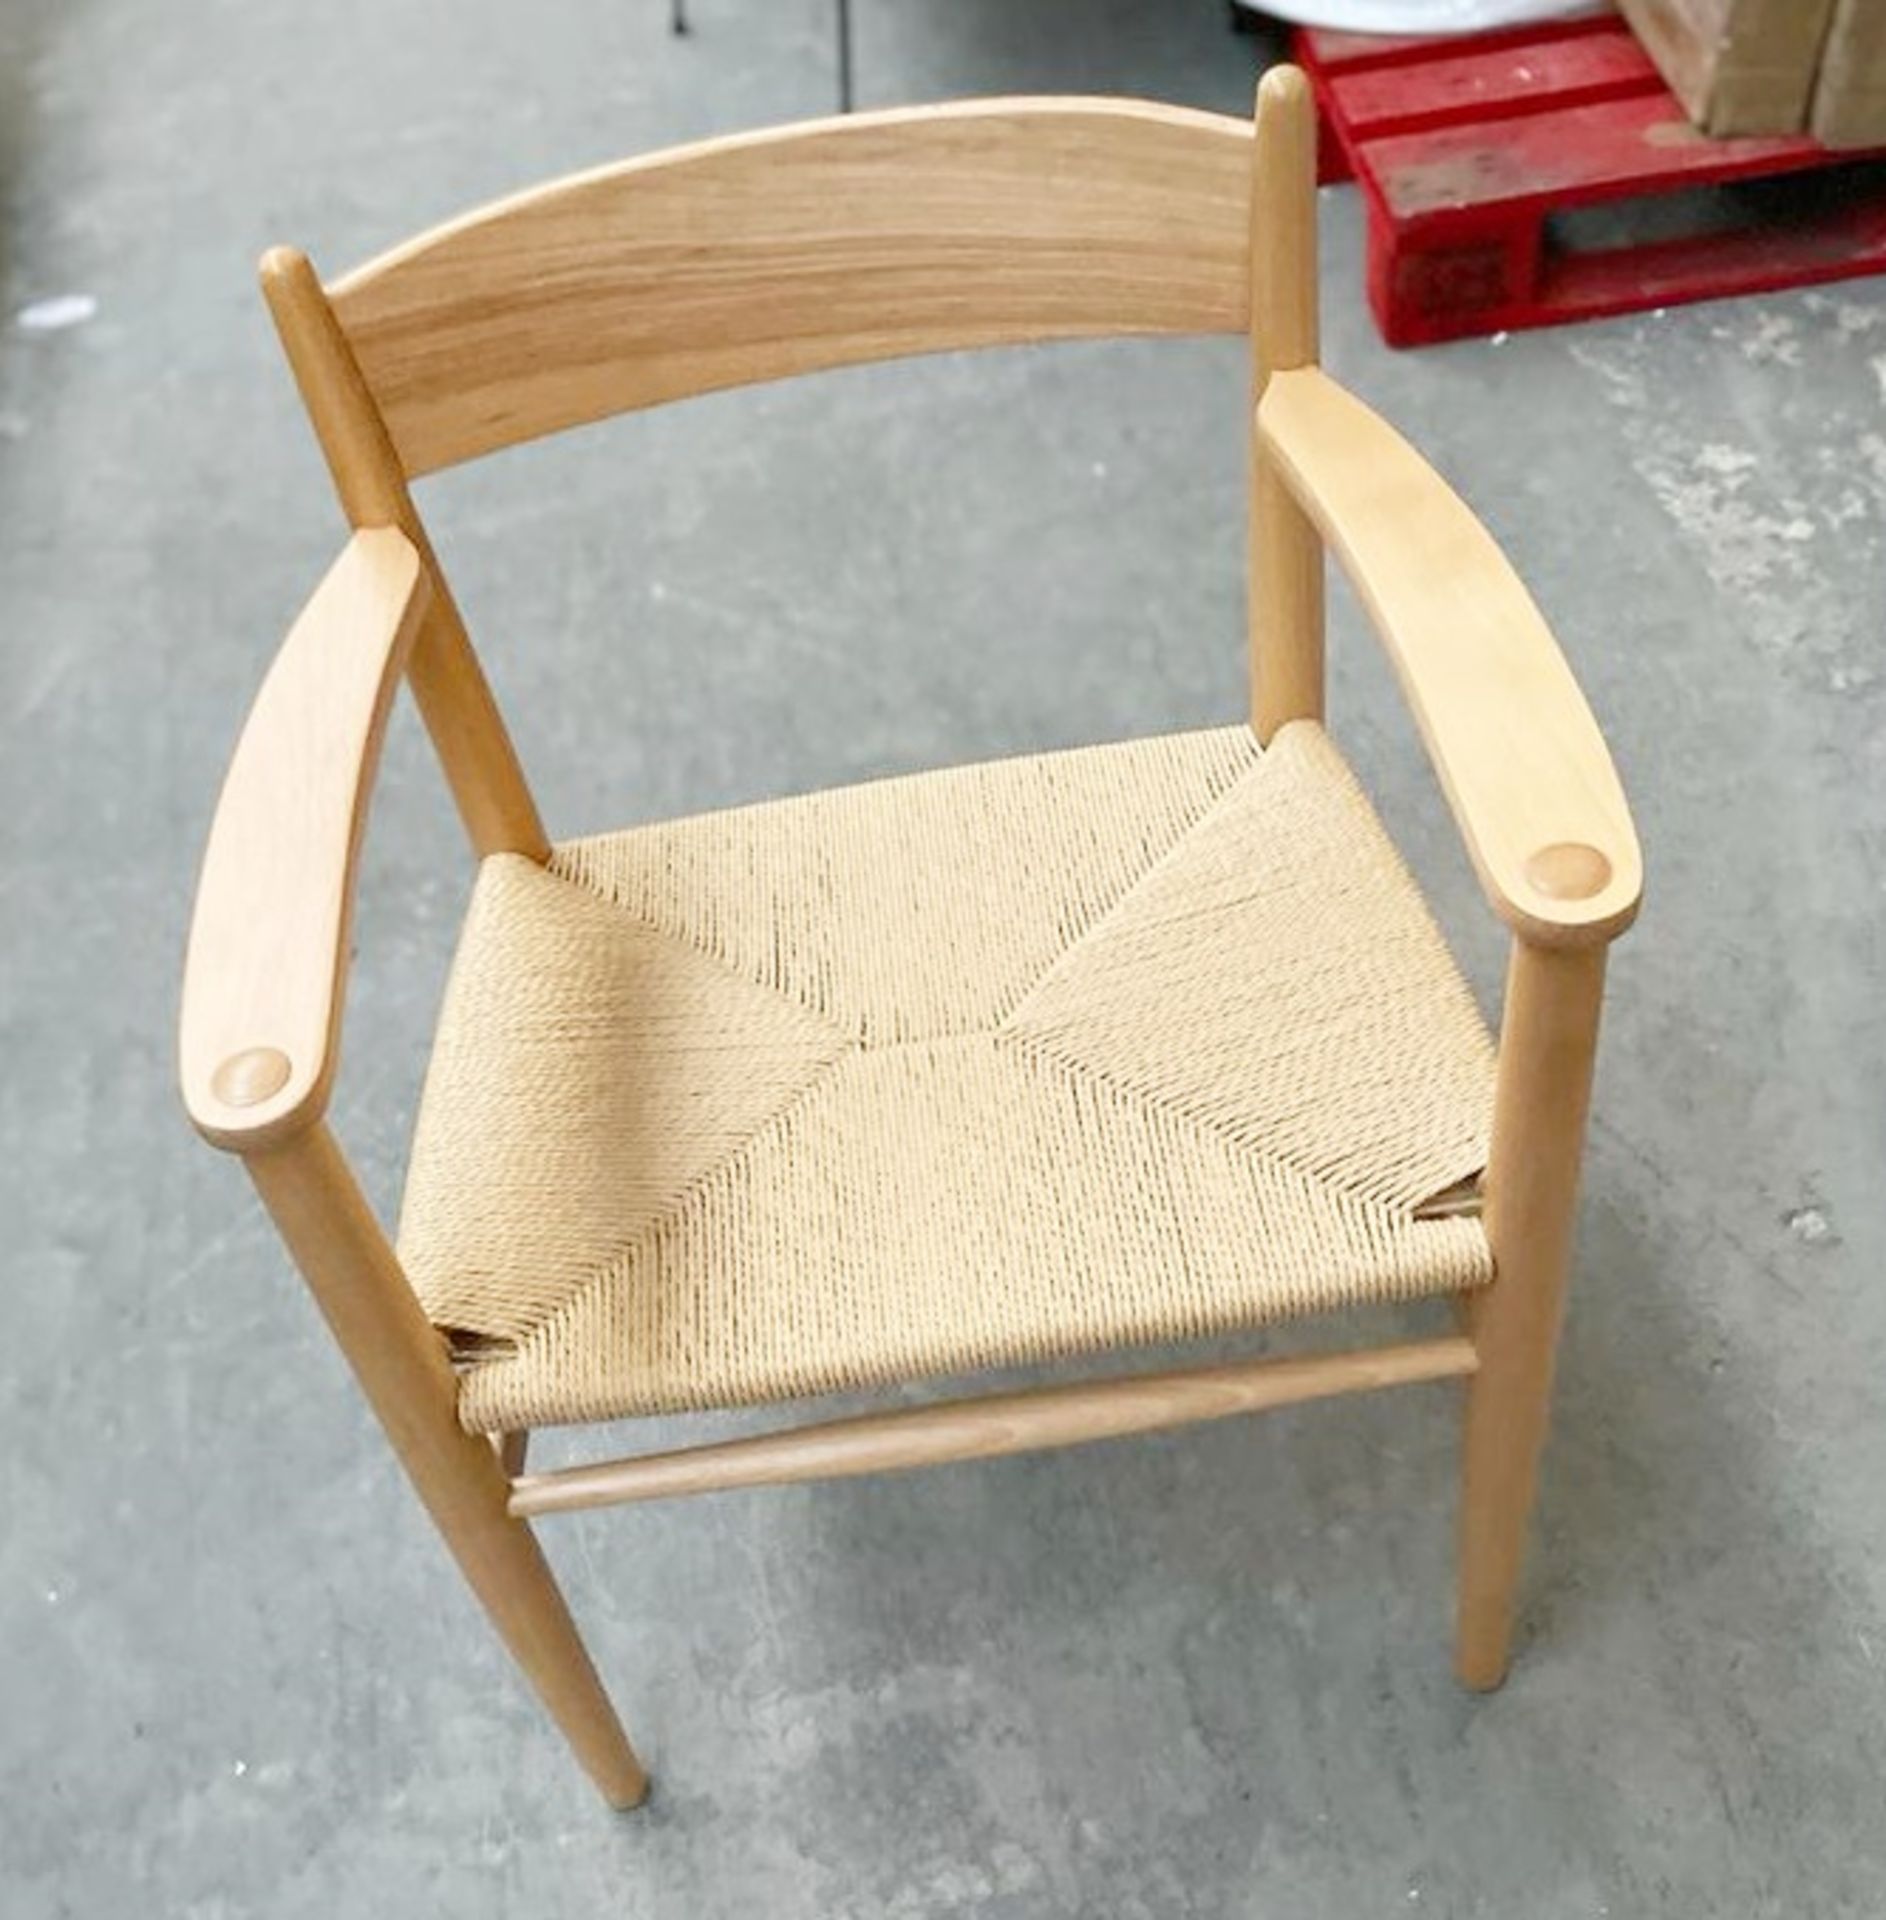 2 x Nielsen Natural + Natural Cord Chair With Arm Rests - Dimensions: 50(h) x 48(d) x 58(w) cm - - Image 6 of 7